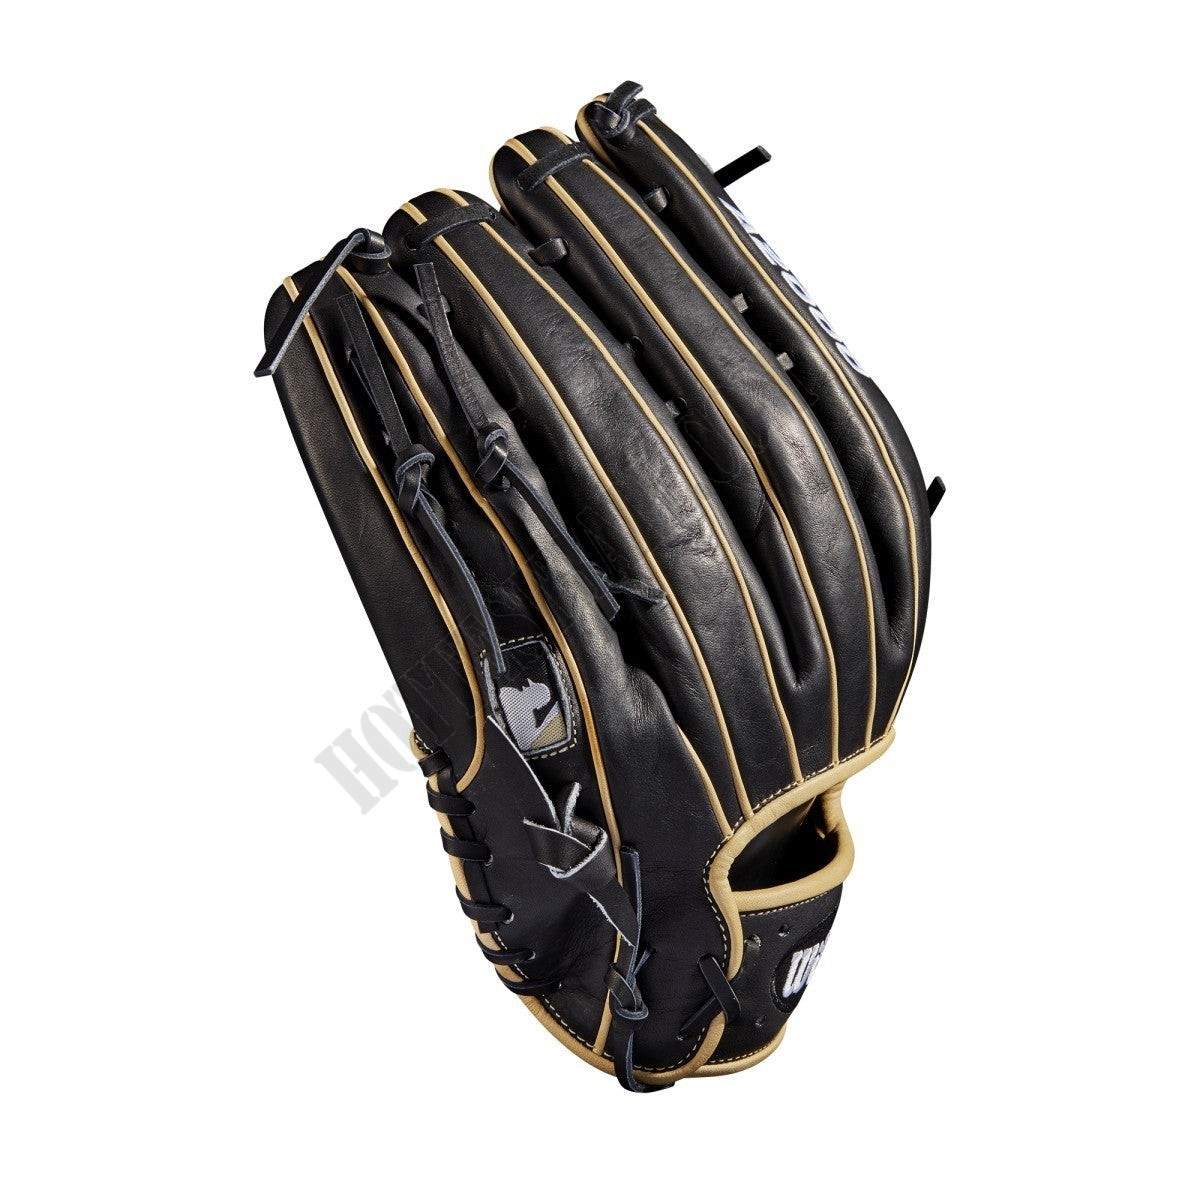 2019 A2000 KP92 12.5" Outfield Baseball Glove ● Wilson Promotions - -7